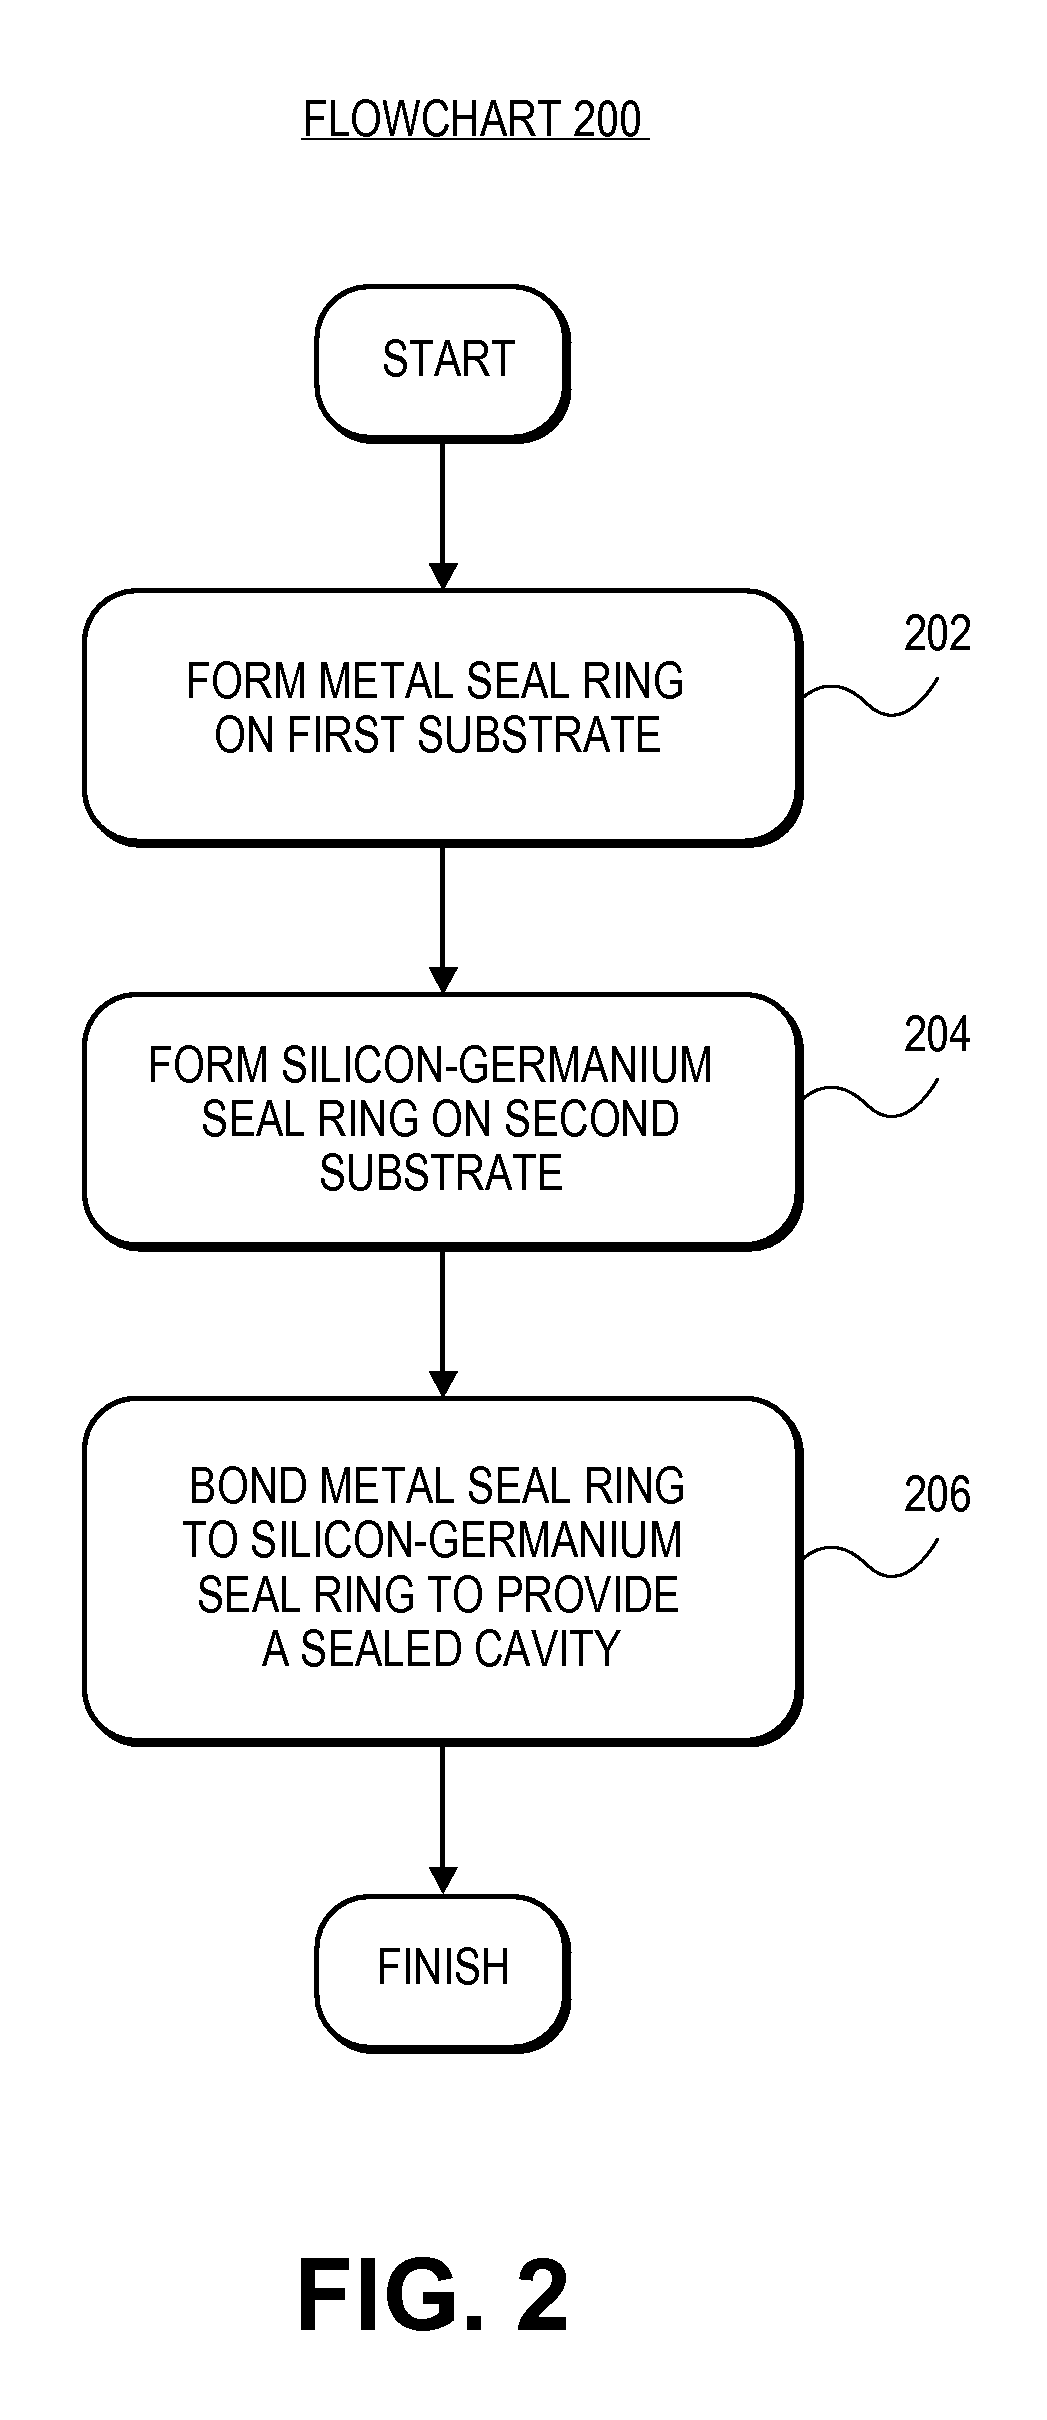 Encapsulated MEMS device and method to form the same